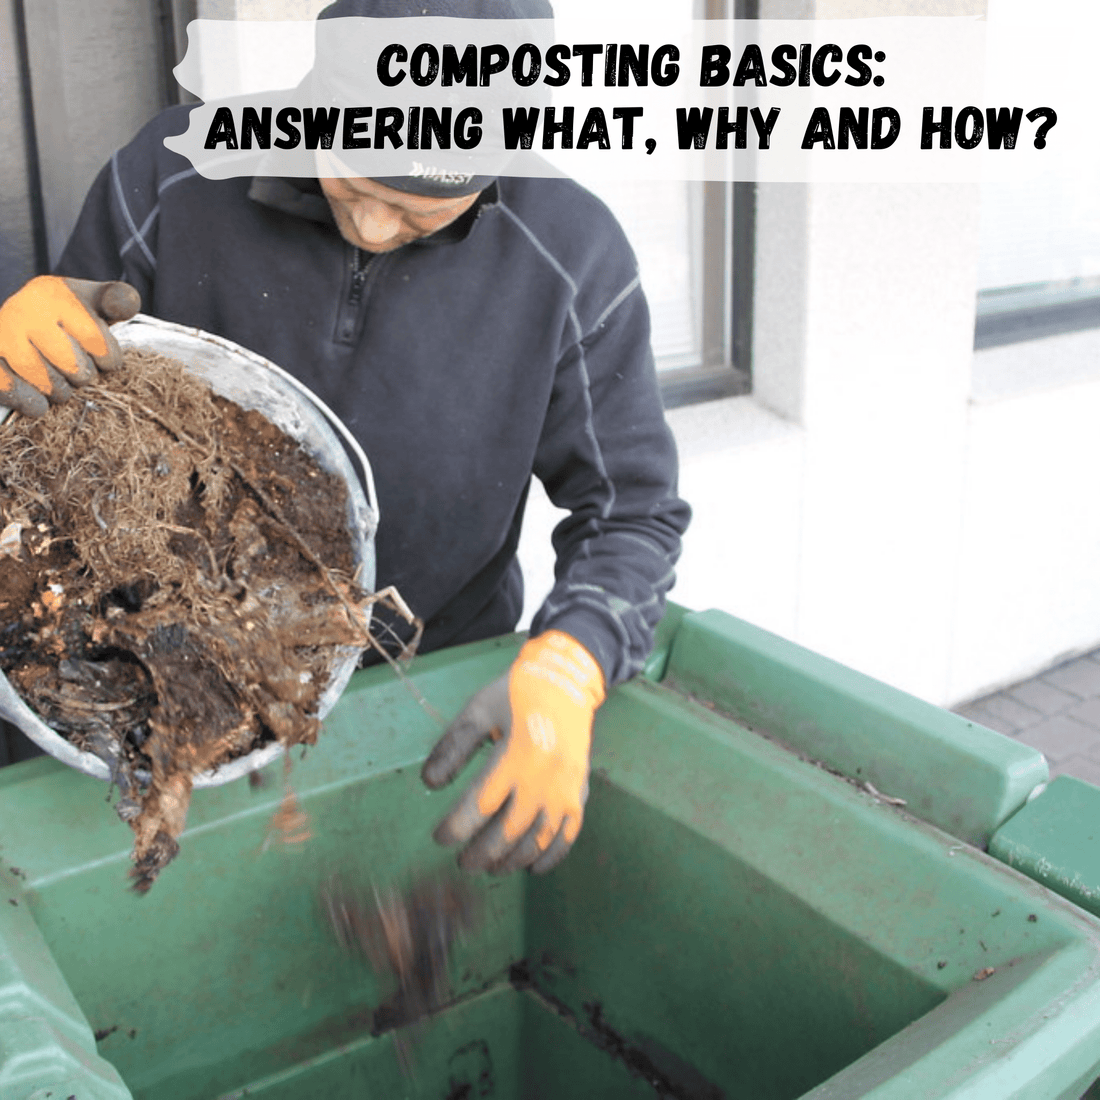 man dumping compost scraps into large green compost bin